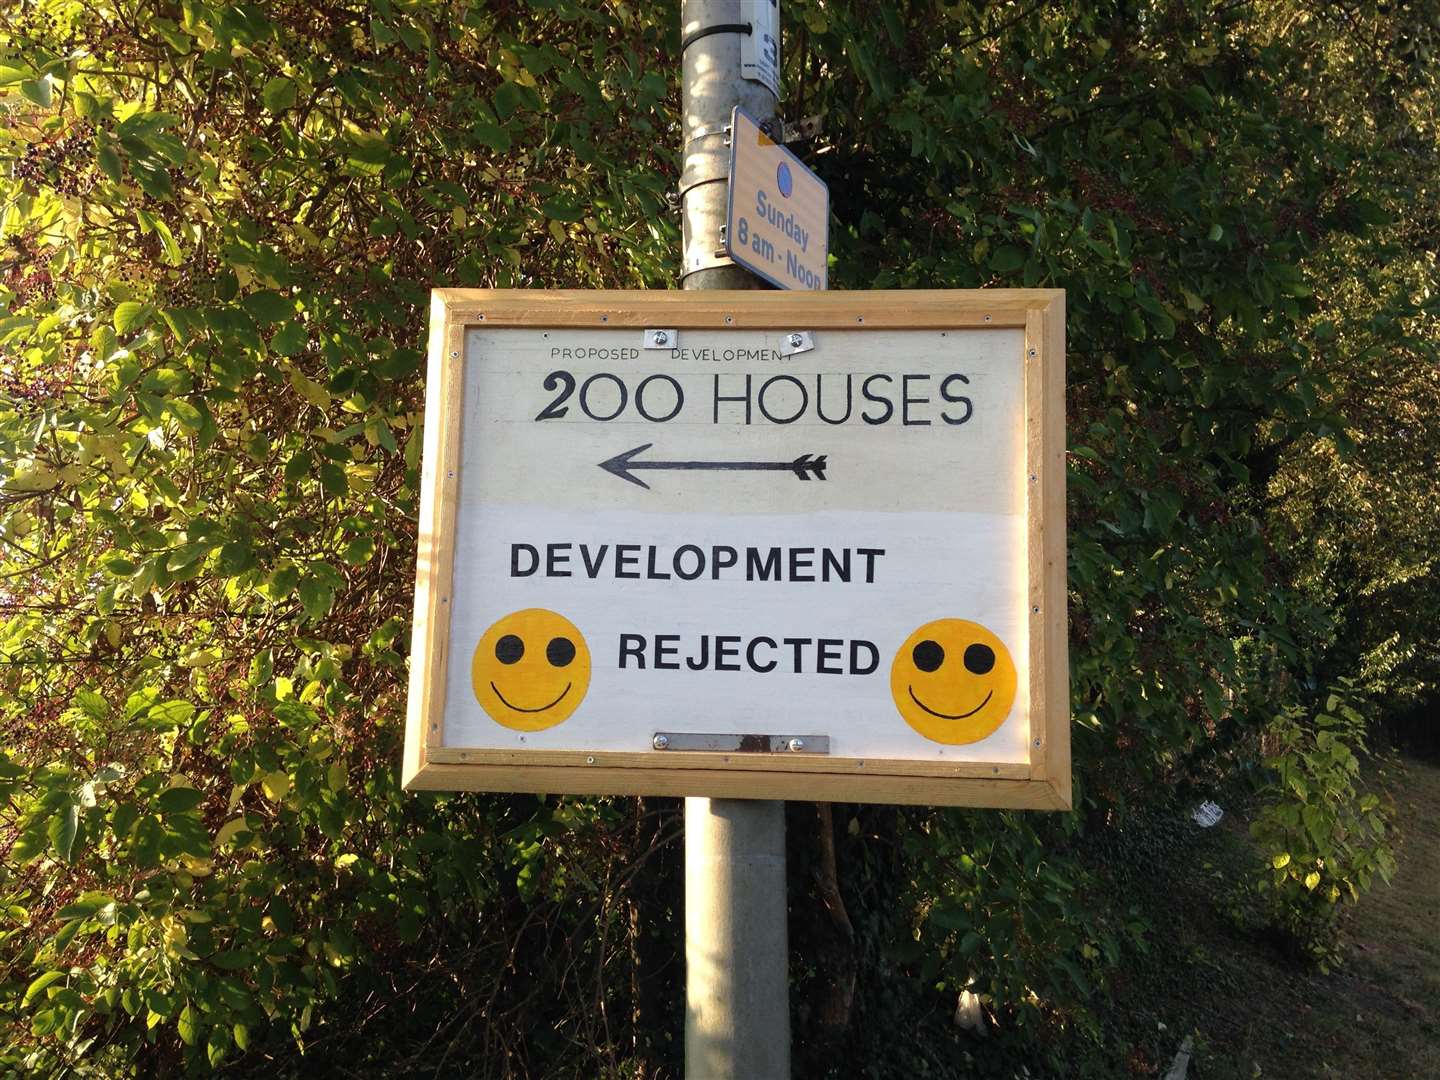 Posters went up in Otterham Quay Lane when the plan for 200 homes was rejected